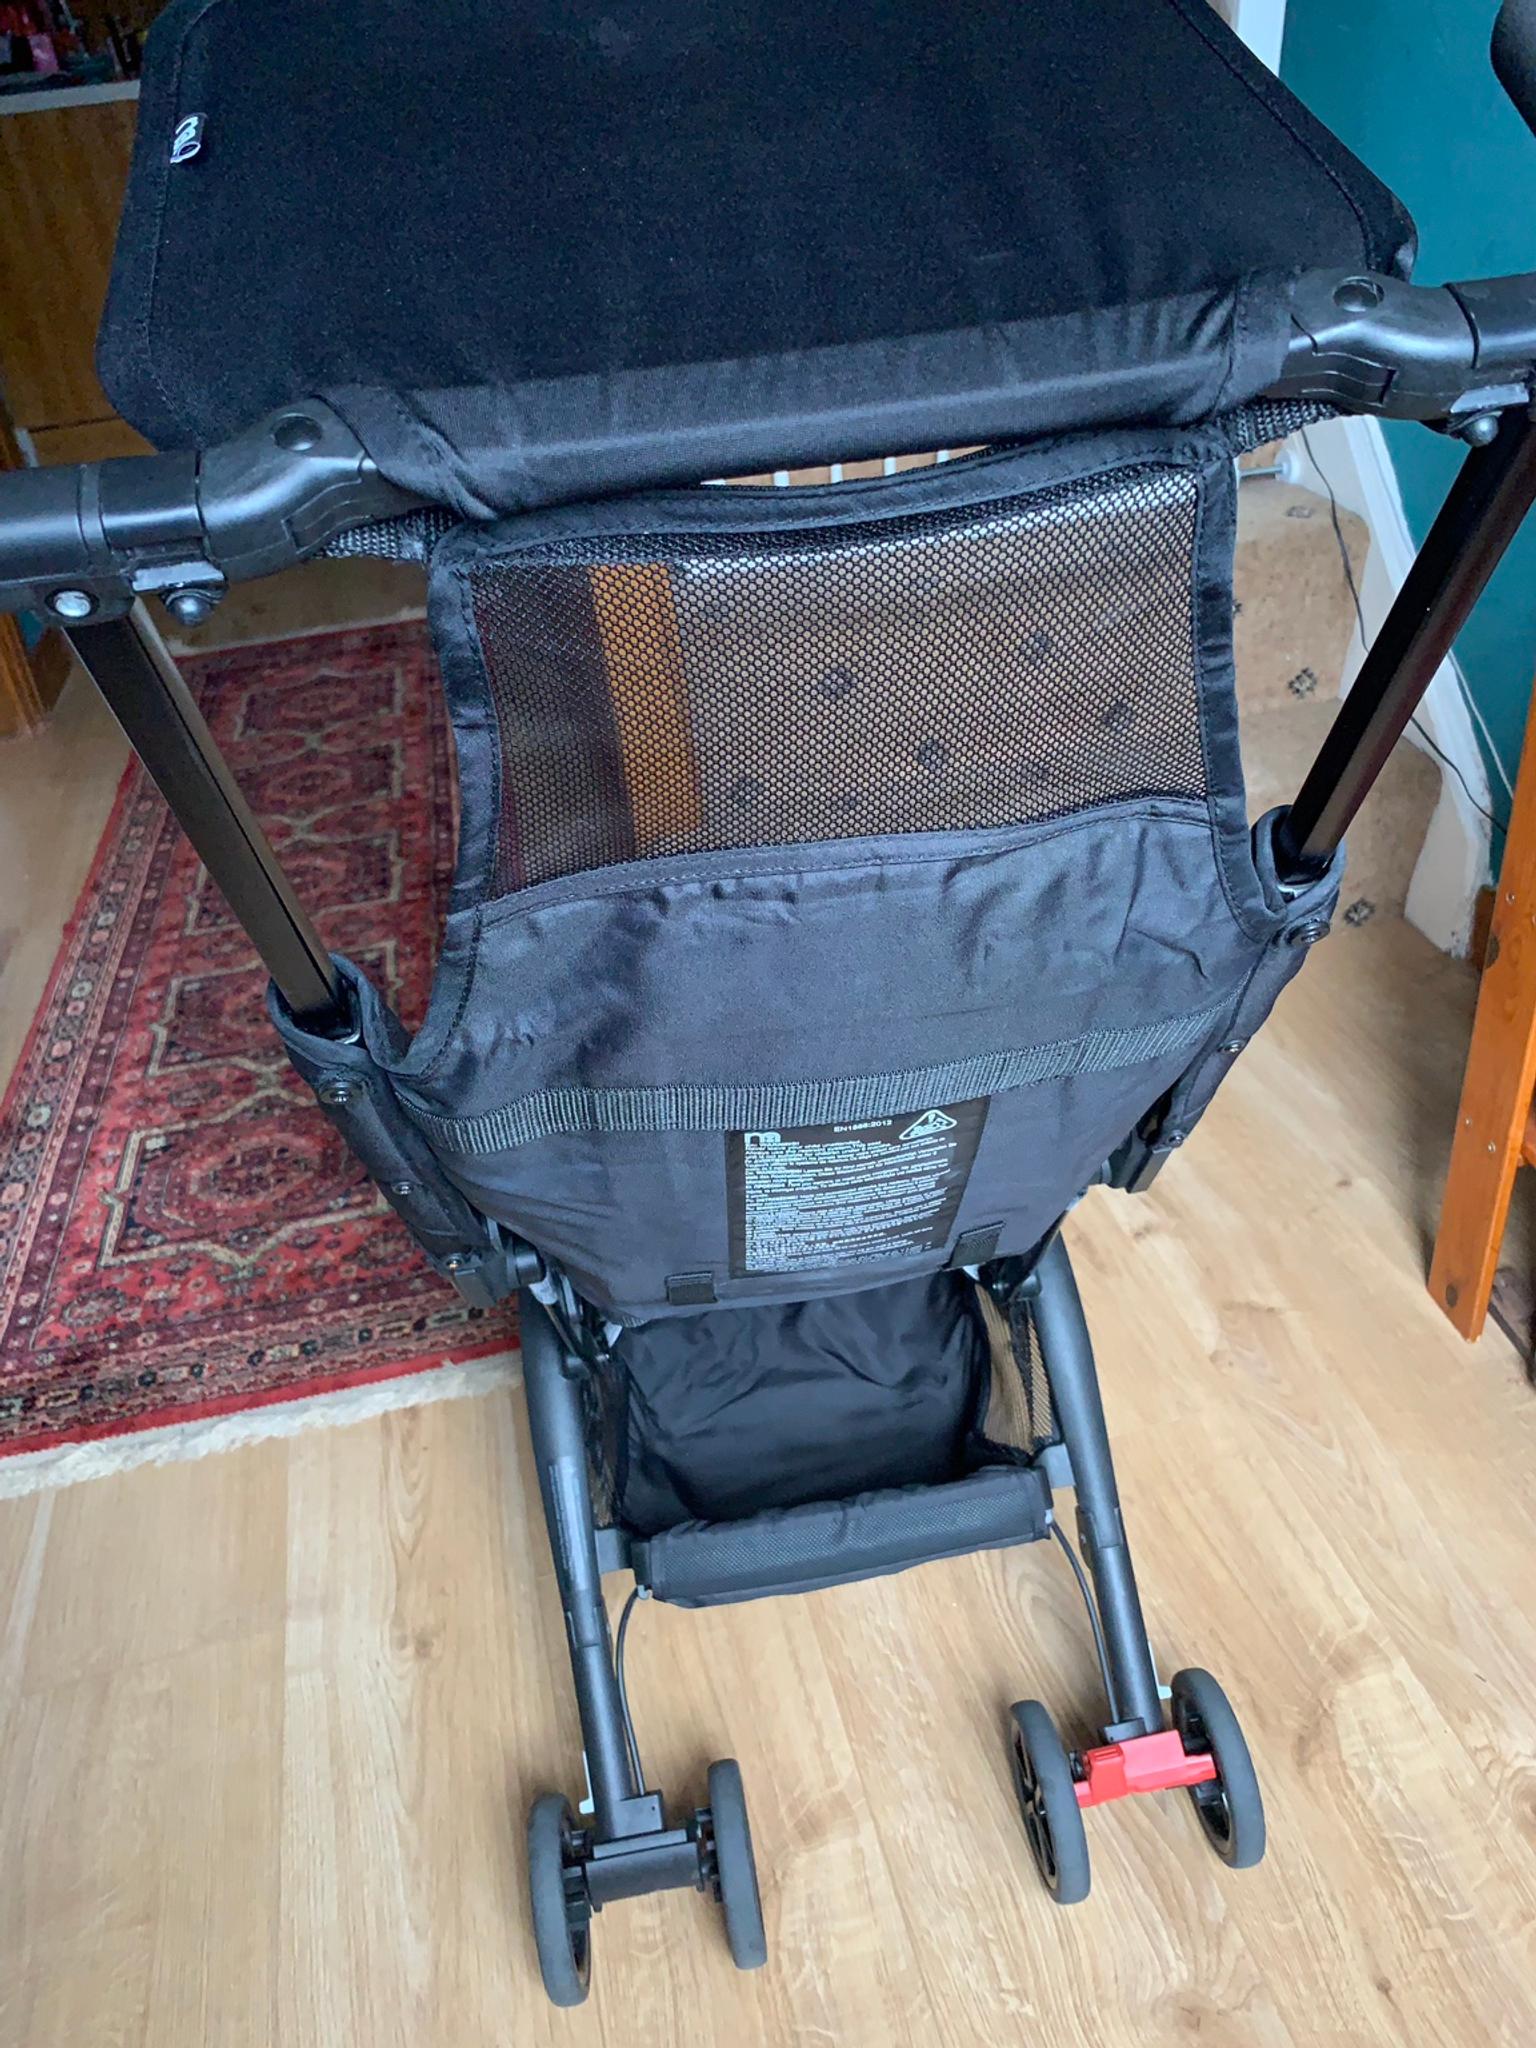 mothercare xss compact stroller black